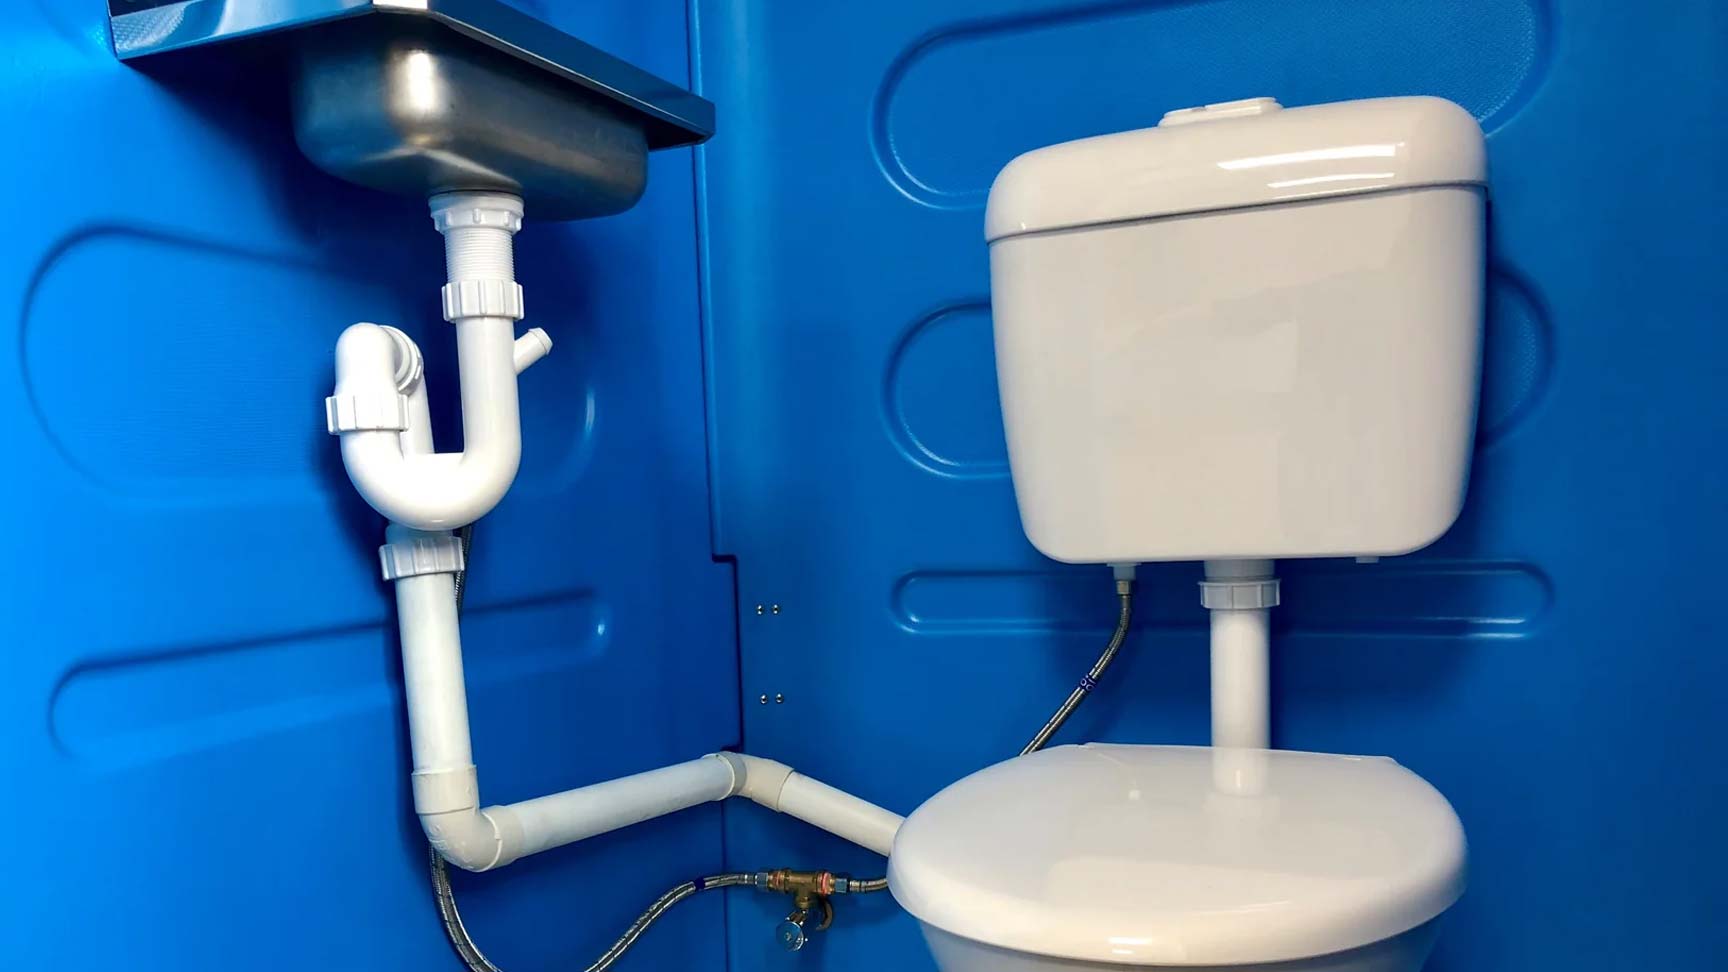 4 Reasons to Use a Sewer Connect Portable Toilet on a Worksite